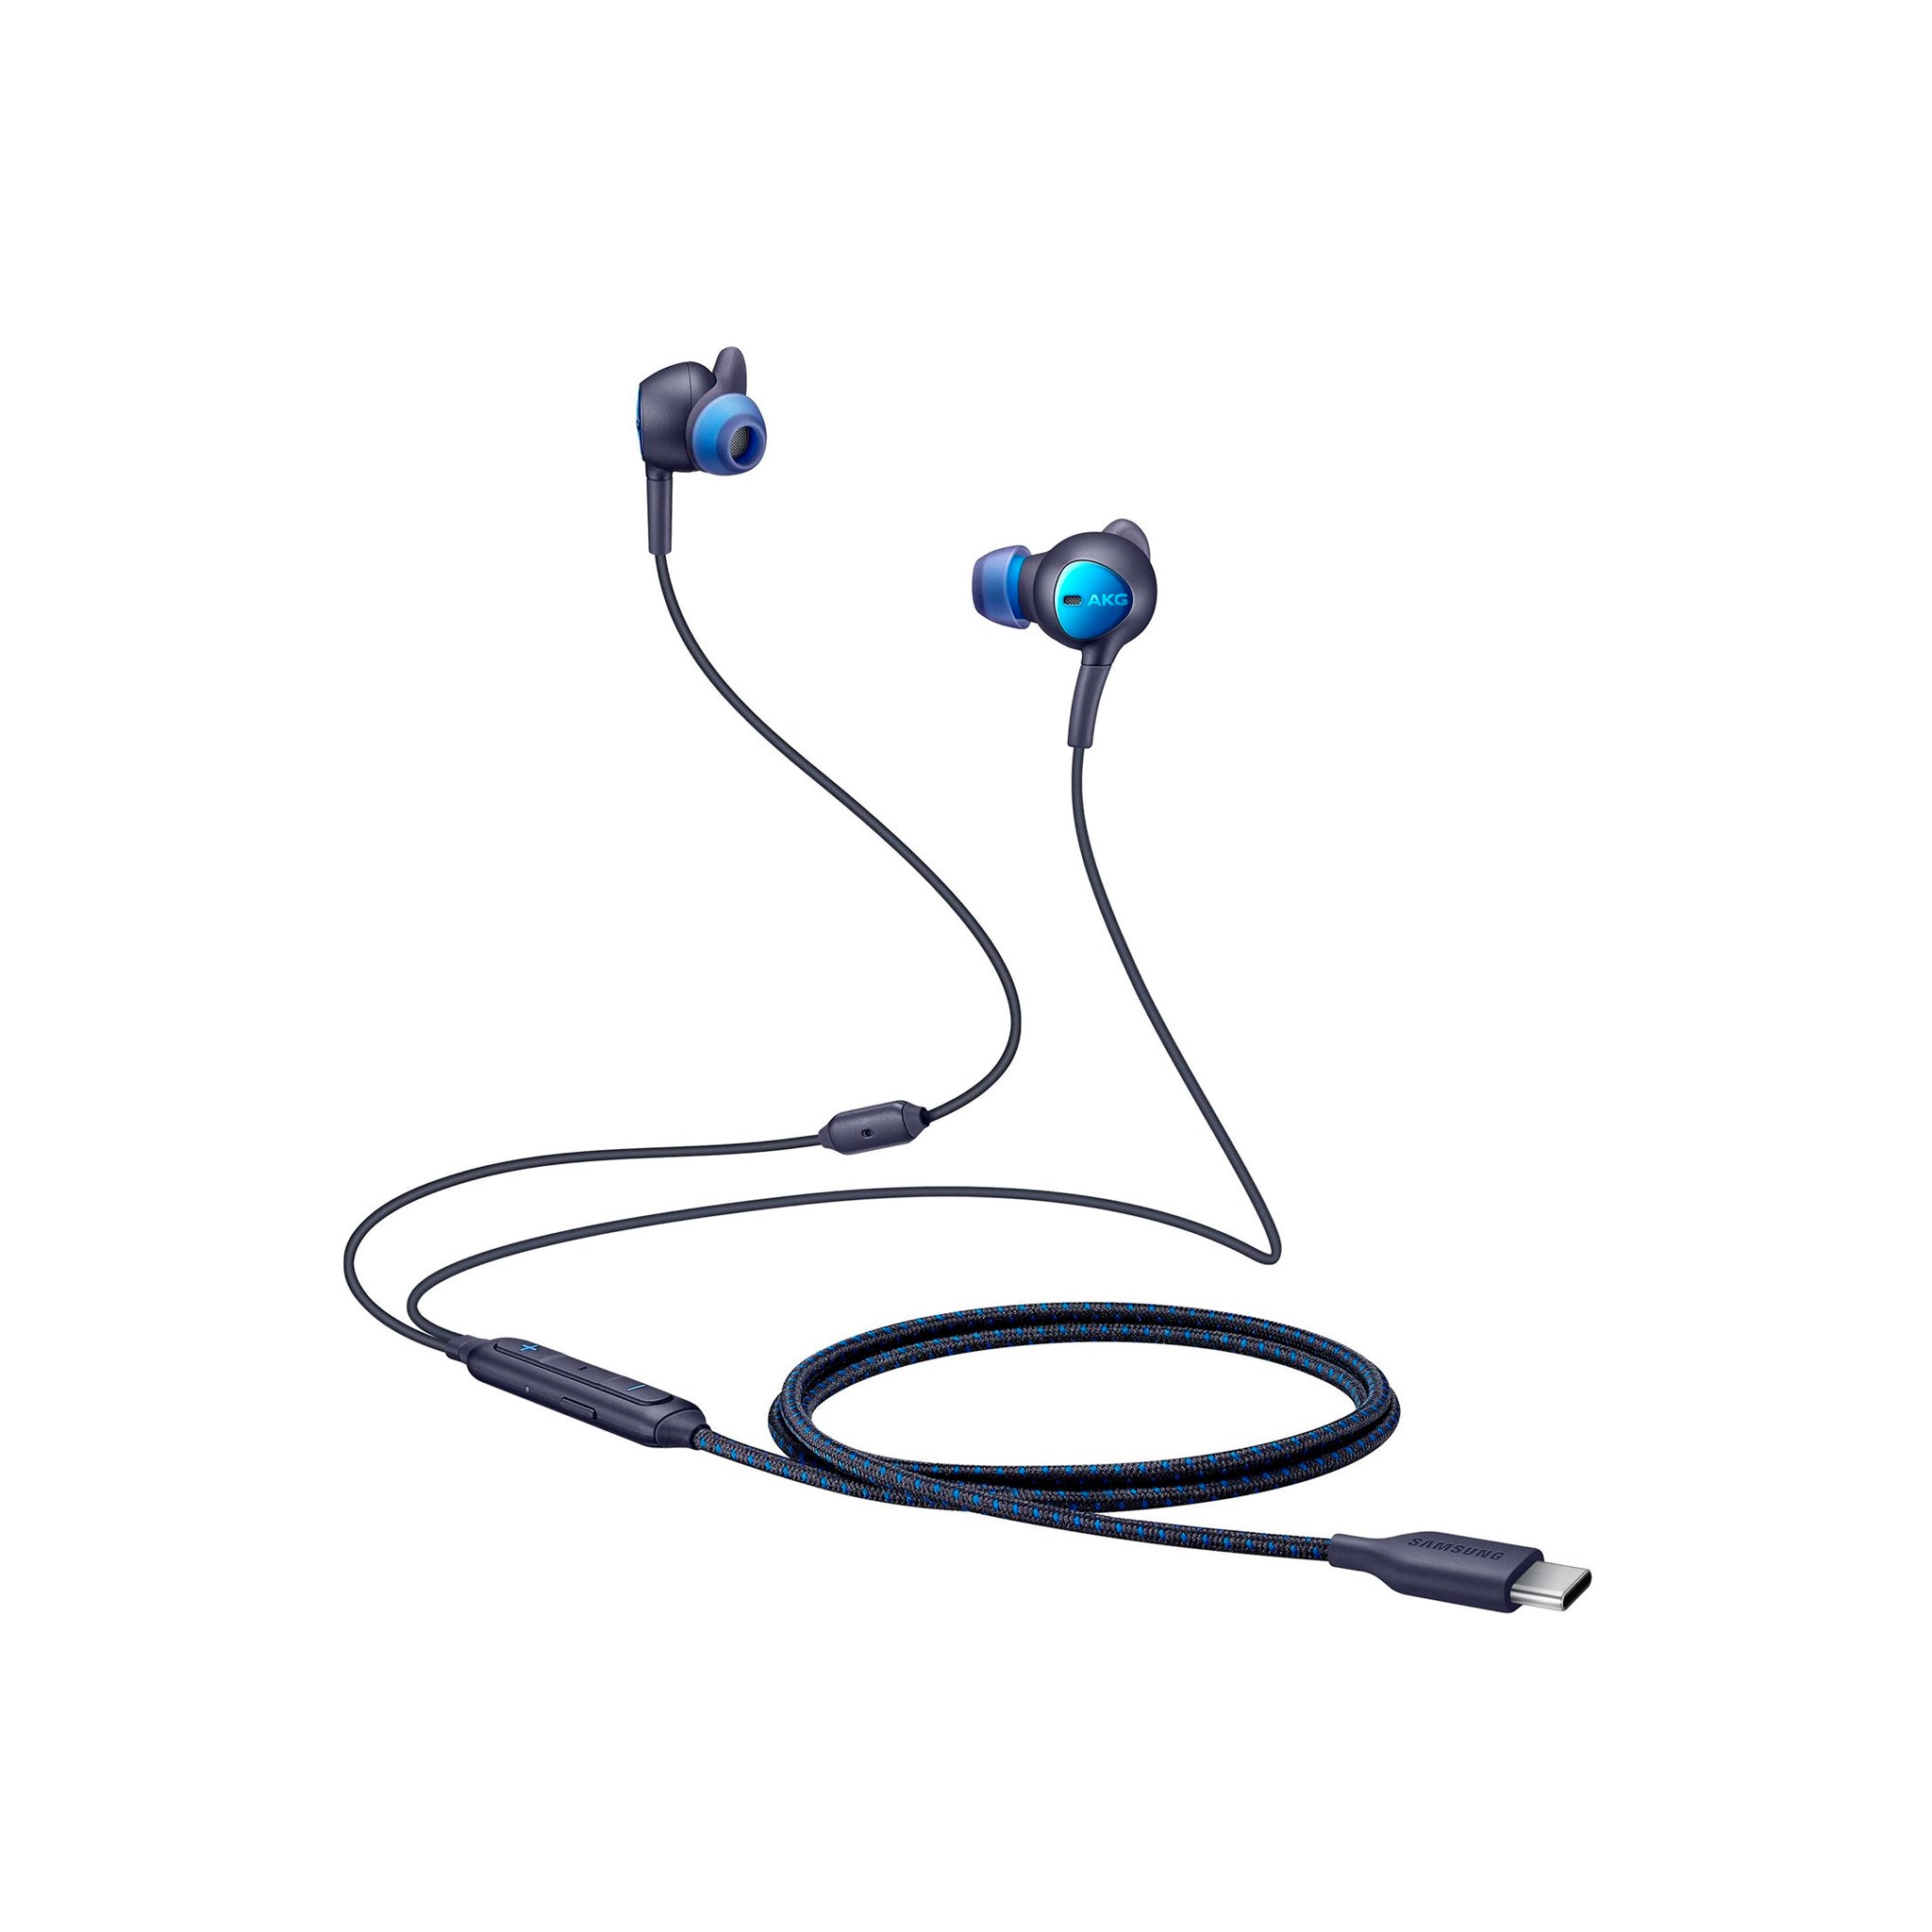 Samsung - In Ear ANC Type C Earphones, AKG, Noise Cancellation for Note 10 , Note 10 Plus, Tab S6 - Black